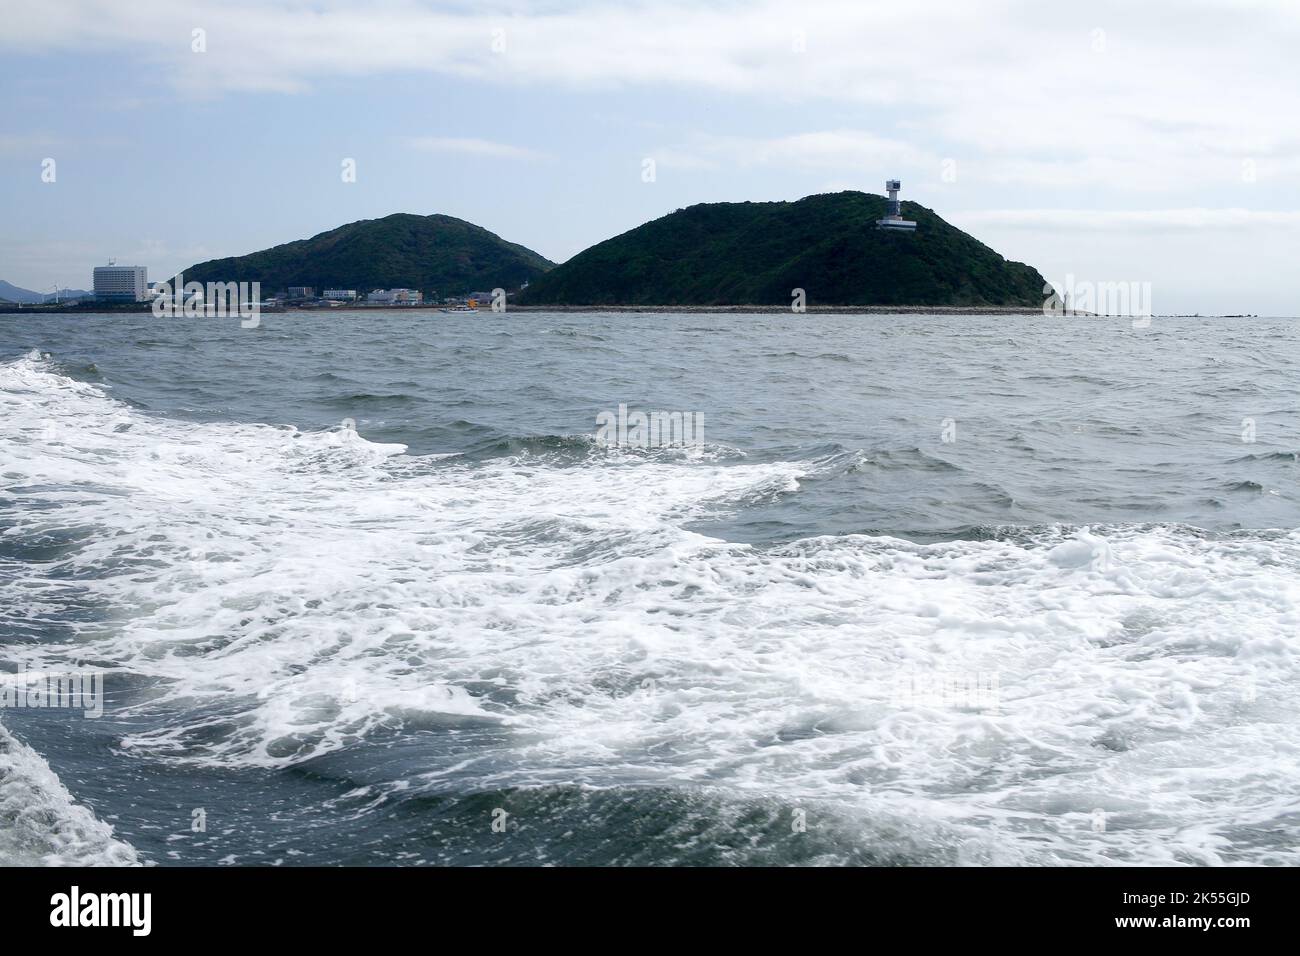 Irago, Aichi, Japan, 2022/24/09 - cape Irago, is the terminal point of land at the west end of Atsumi Peninsula in southern Aichi Prefecture, Japan. T Stock Photo